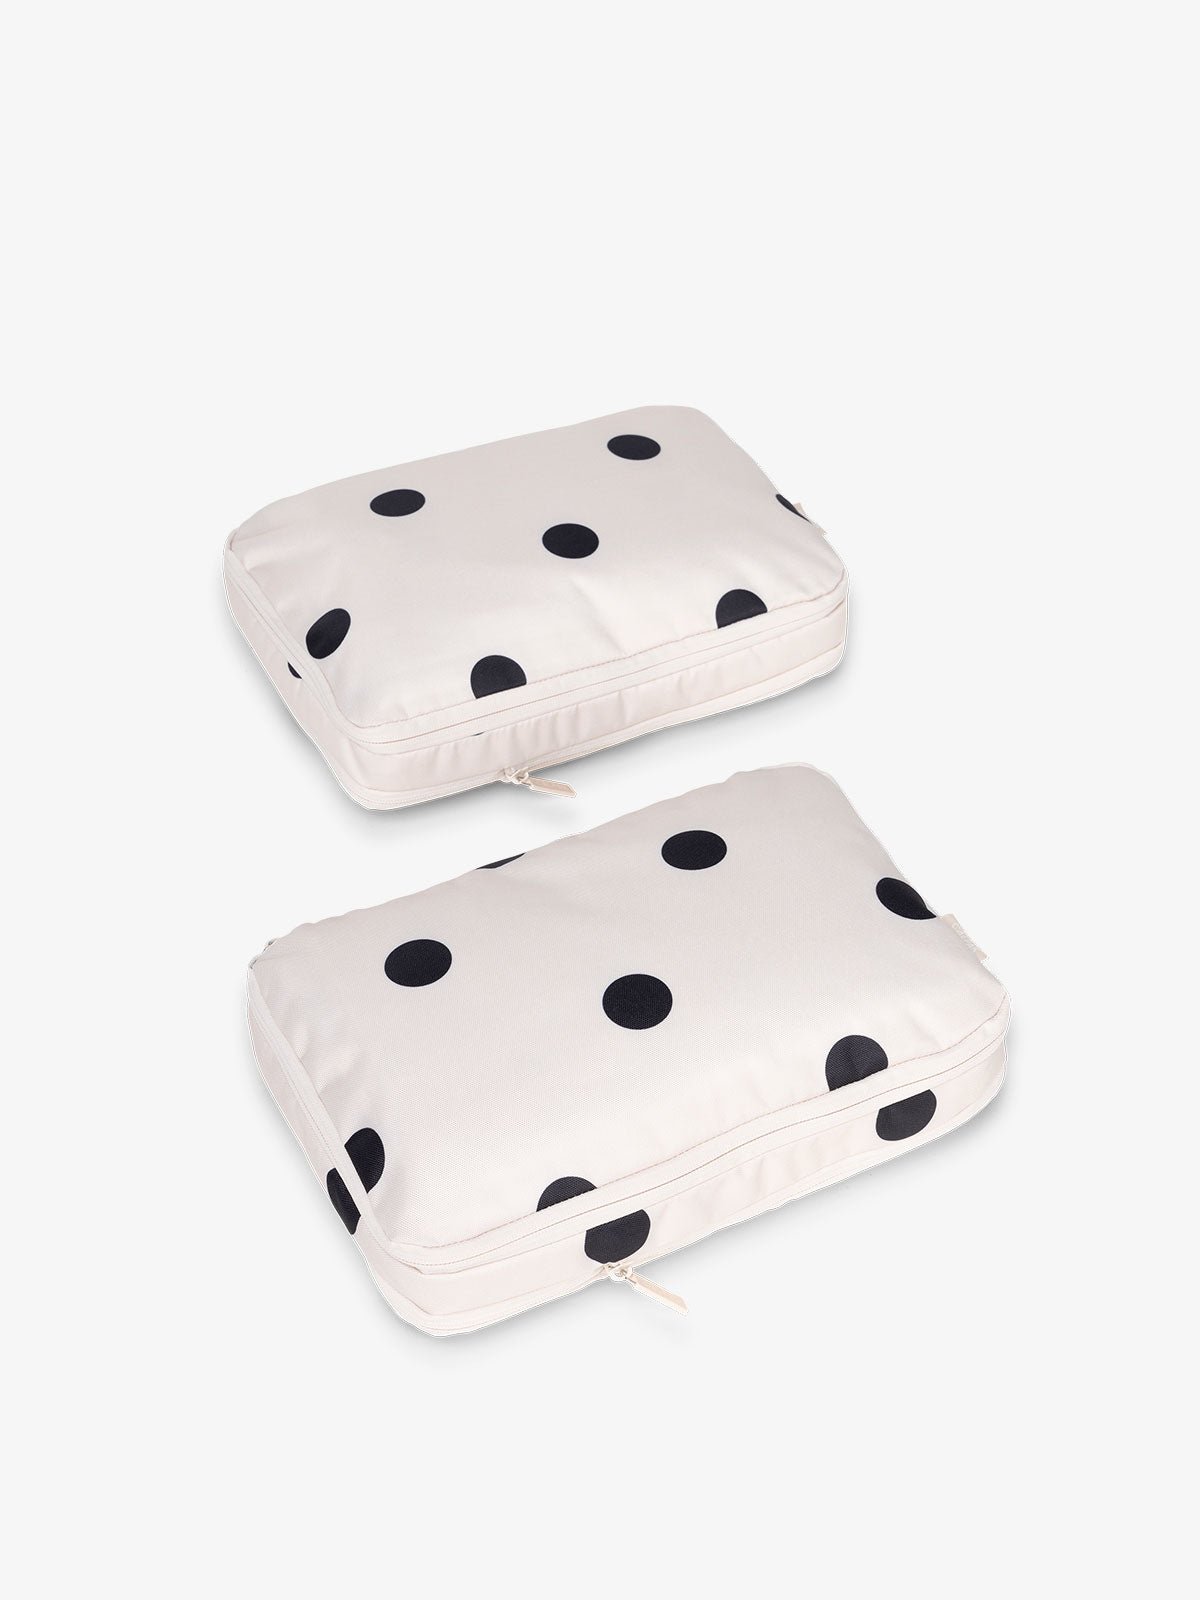 CALPAK small compression packing cubes in black and white polka dot